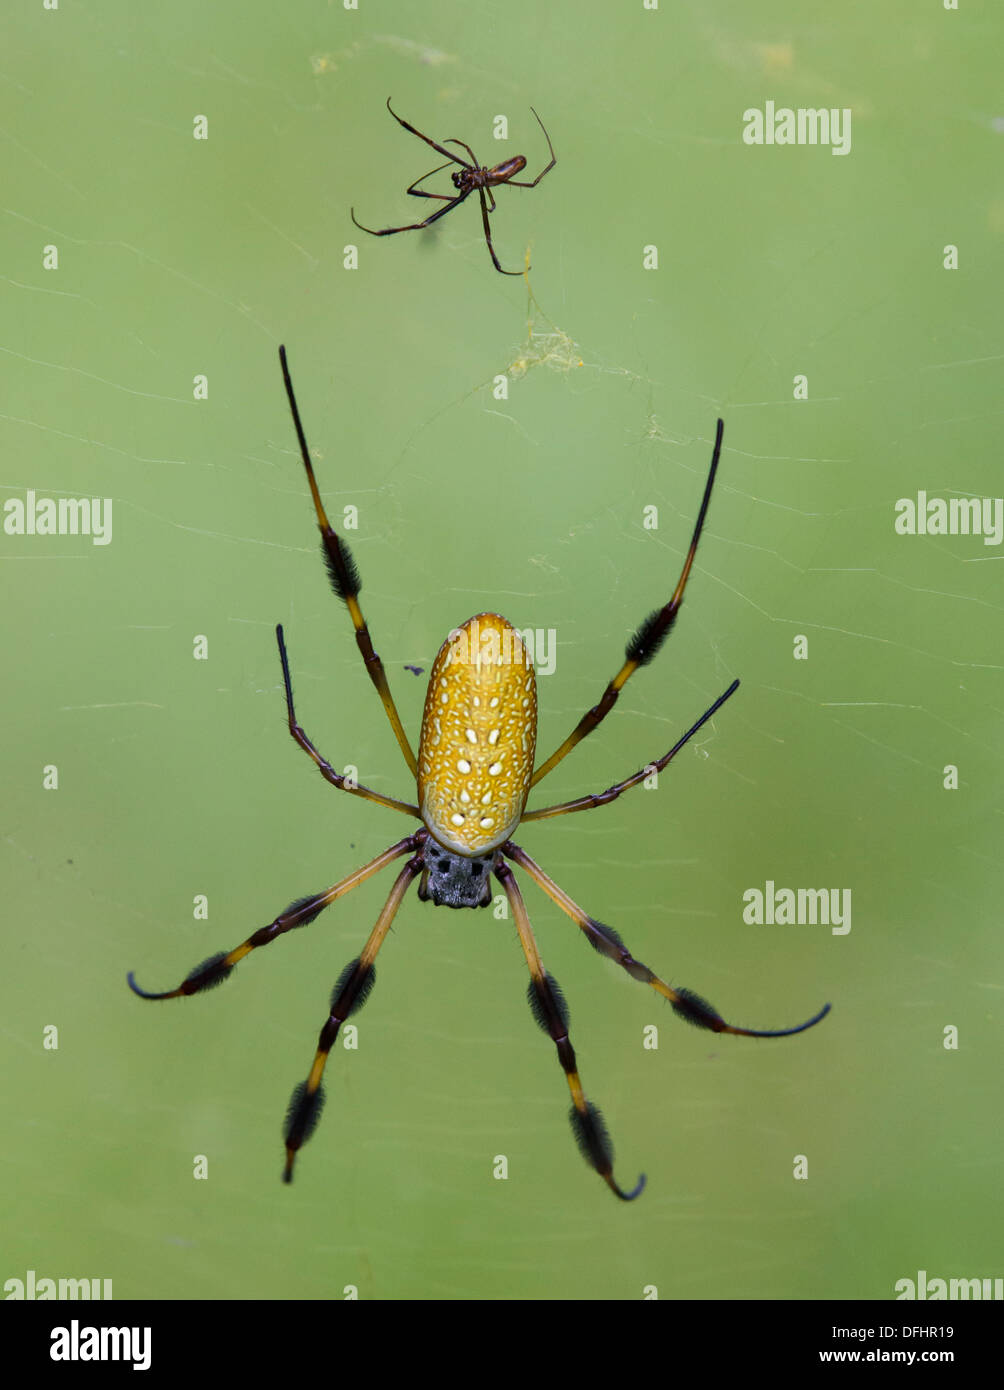 Male And Female Golden Orb Weaver Spiders On Spiderweb Stock Photo